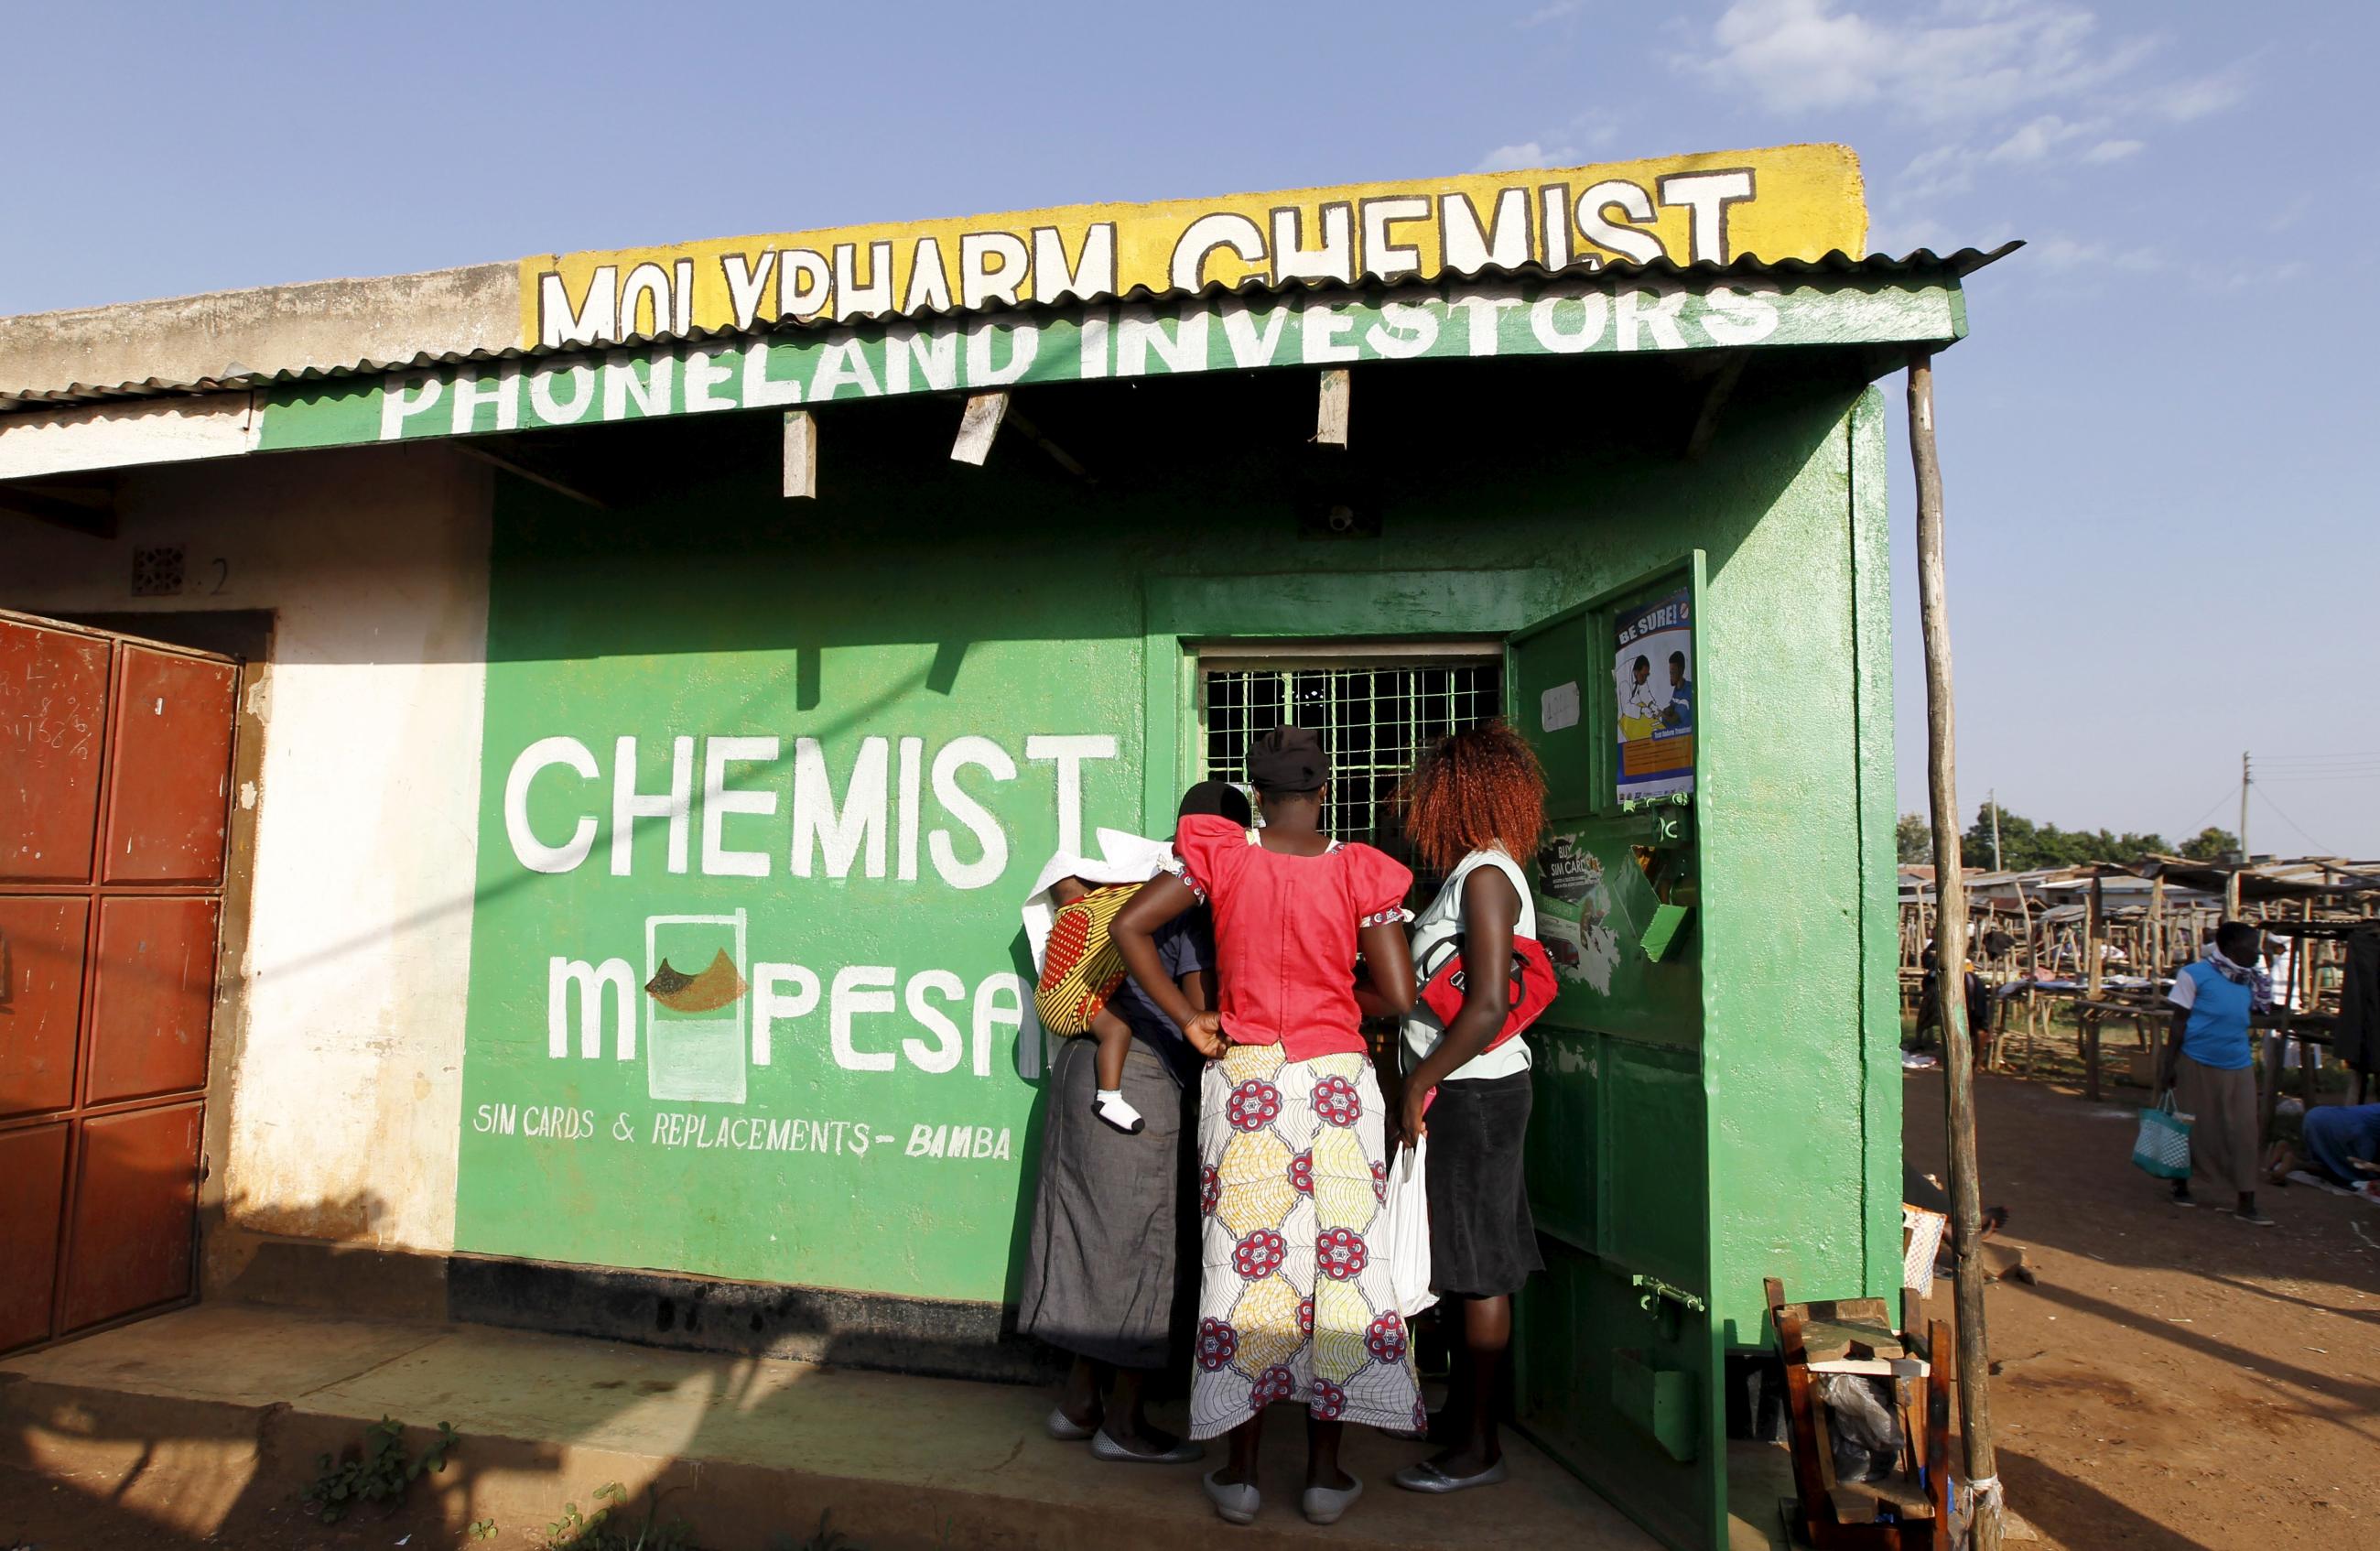 Customers wait to be served at a chemist in the village of Kogelo, west of Kenya's capital Nairobi, July 15, 2015.